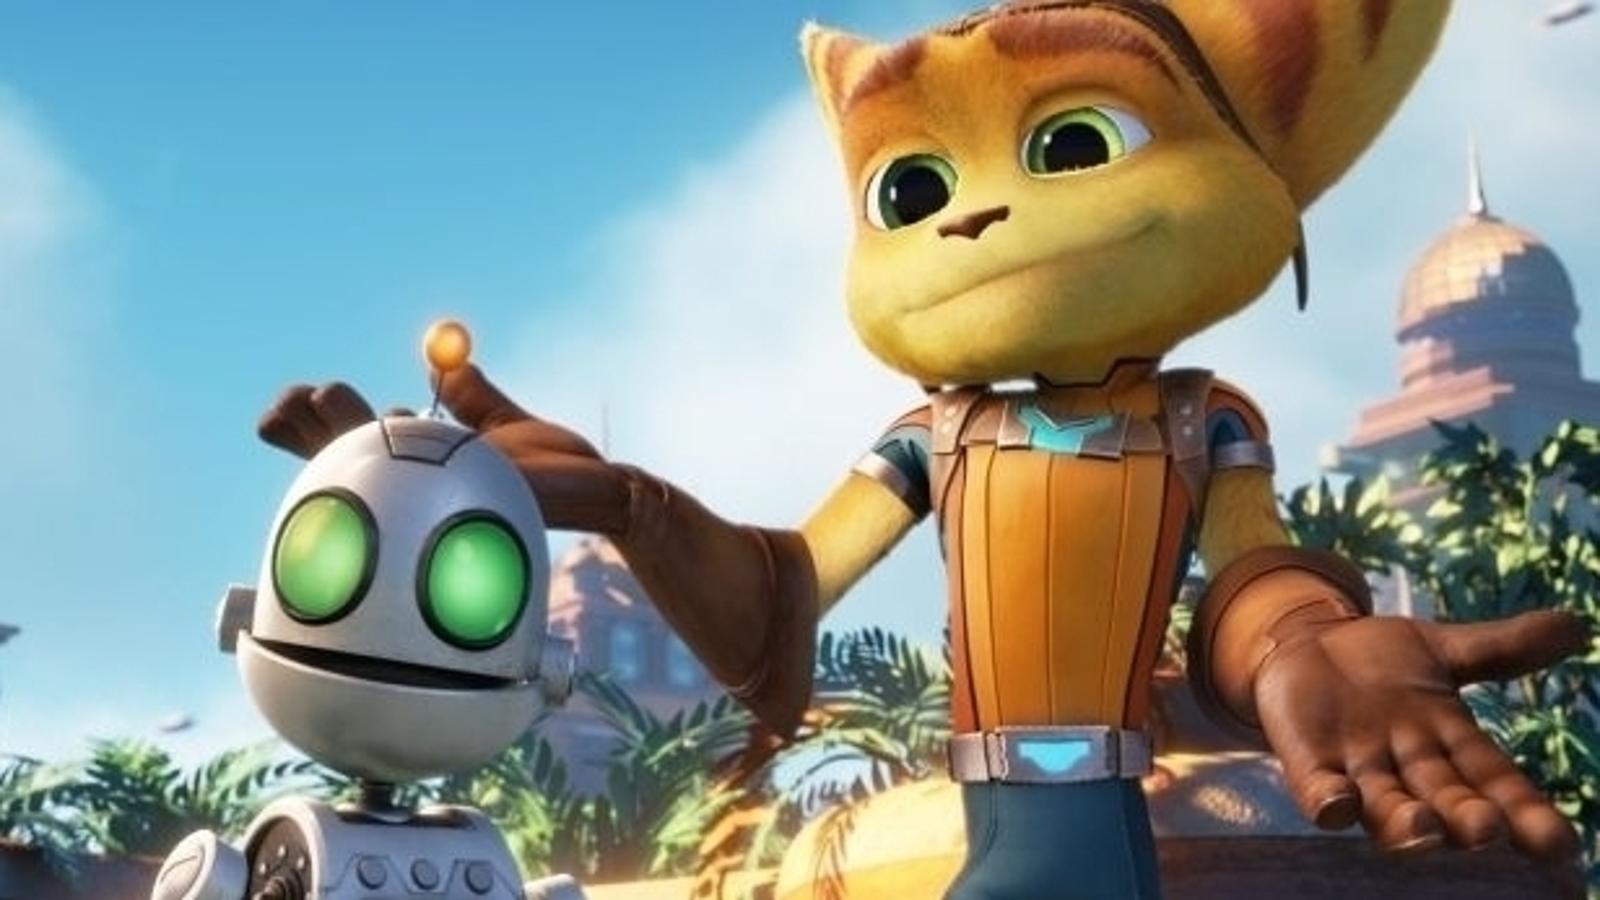 Ratchet & Clank PS4 is being given away for free this March Eurogamer.net